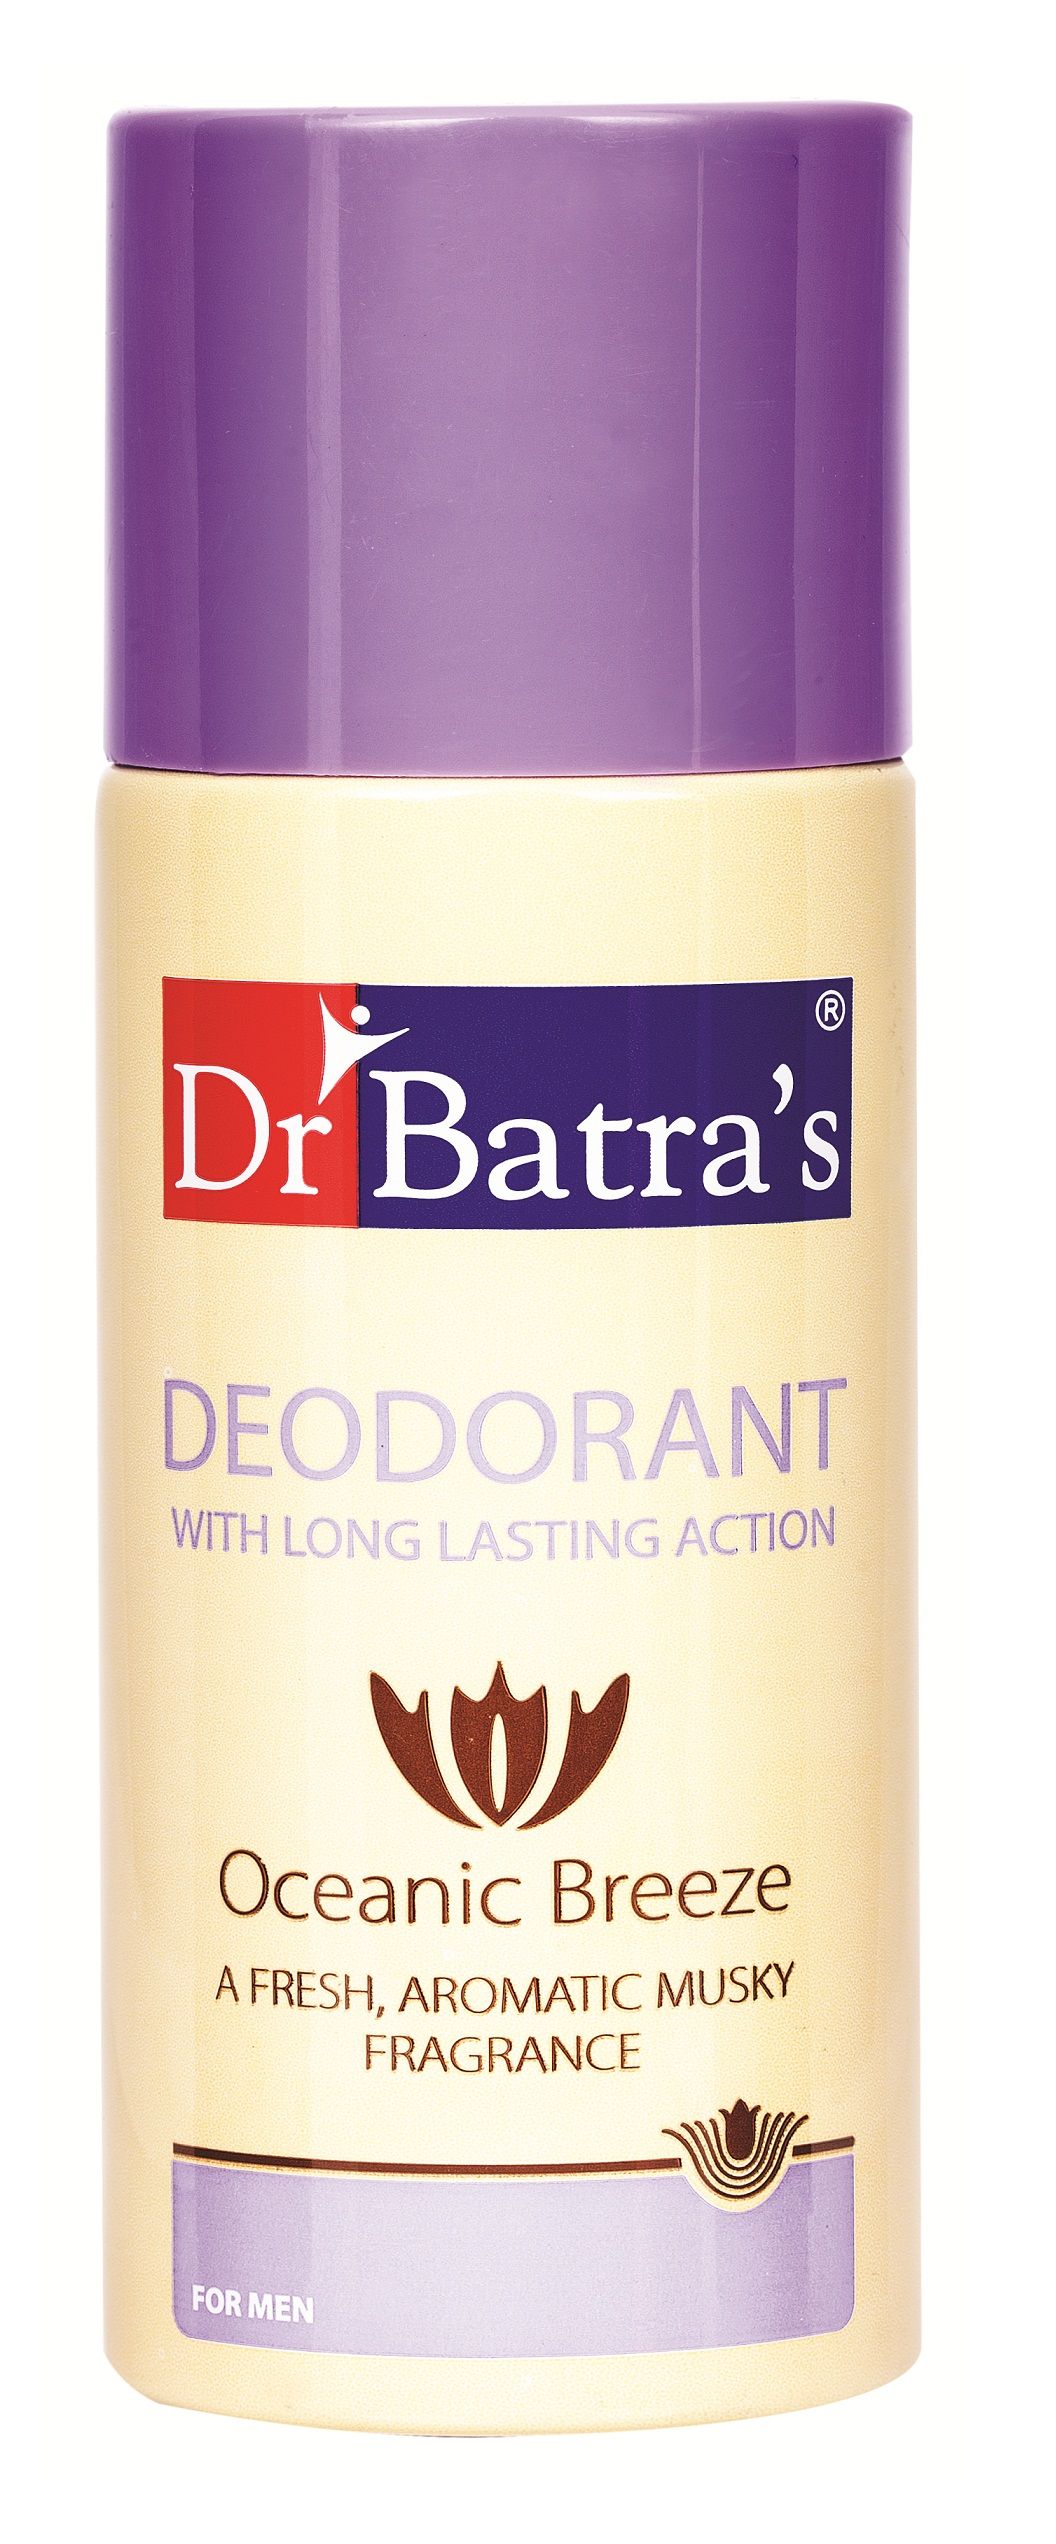 Dr.Batra's Deodarant with Long Lasting Action Oceanic Breeze